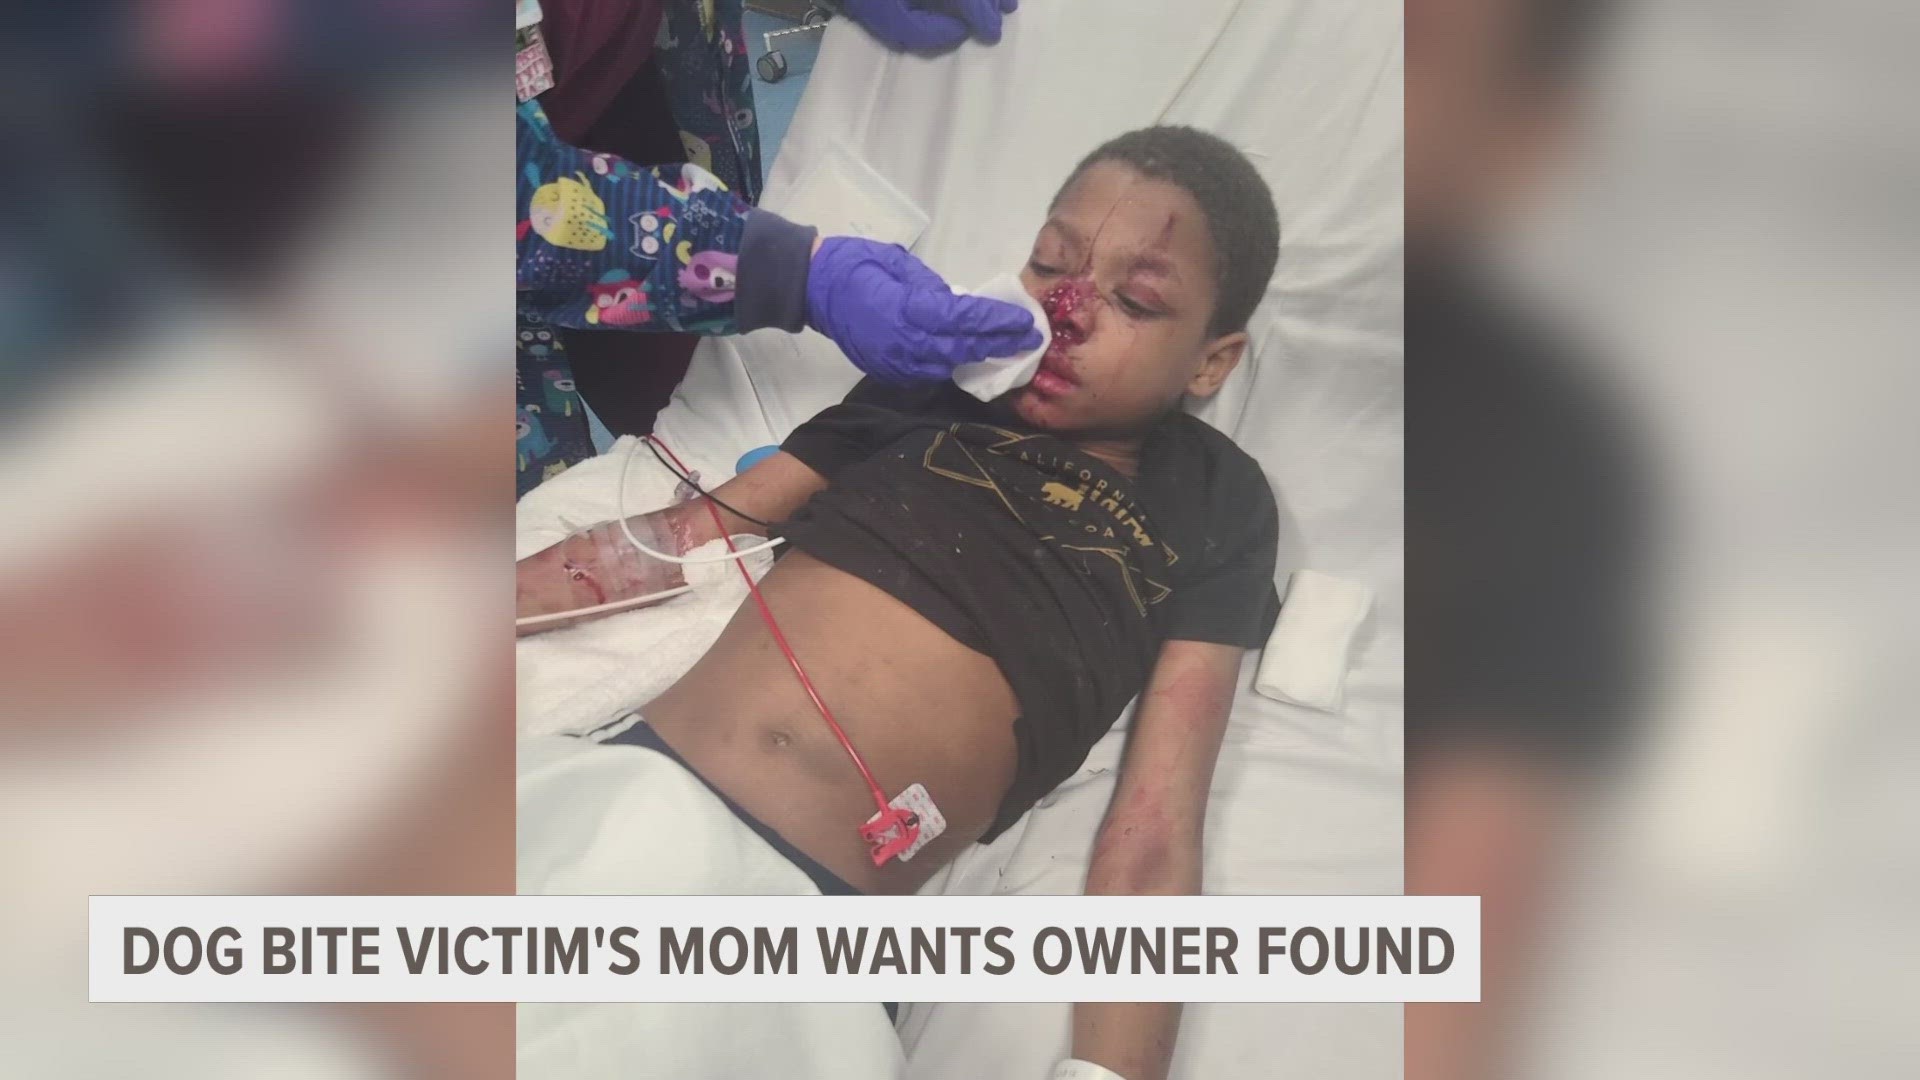 The family of a child who was attacked by a dog wants justice.